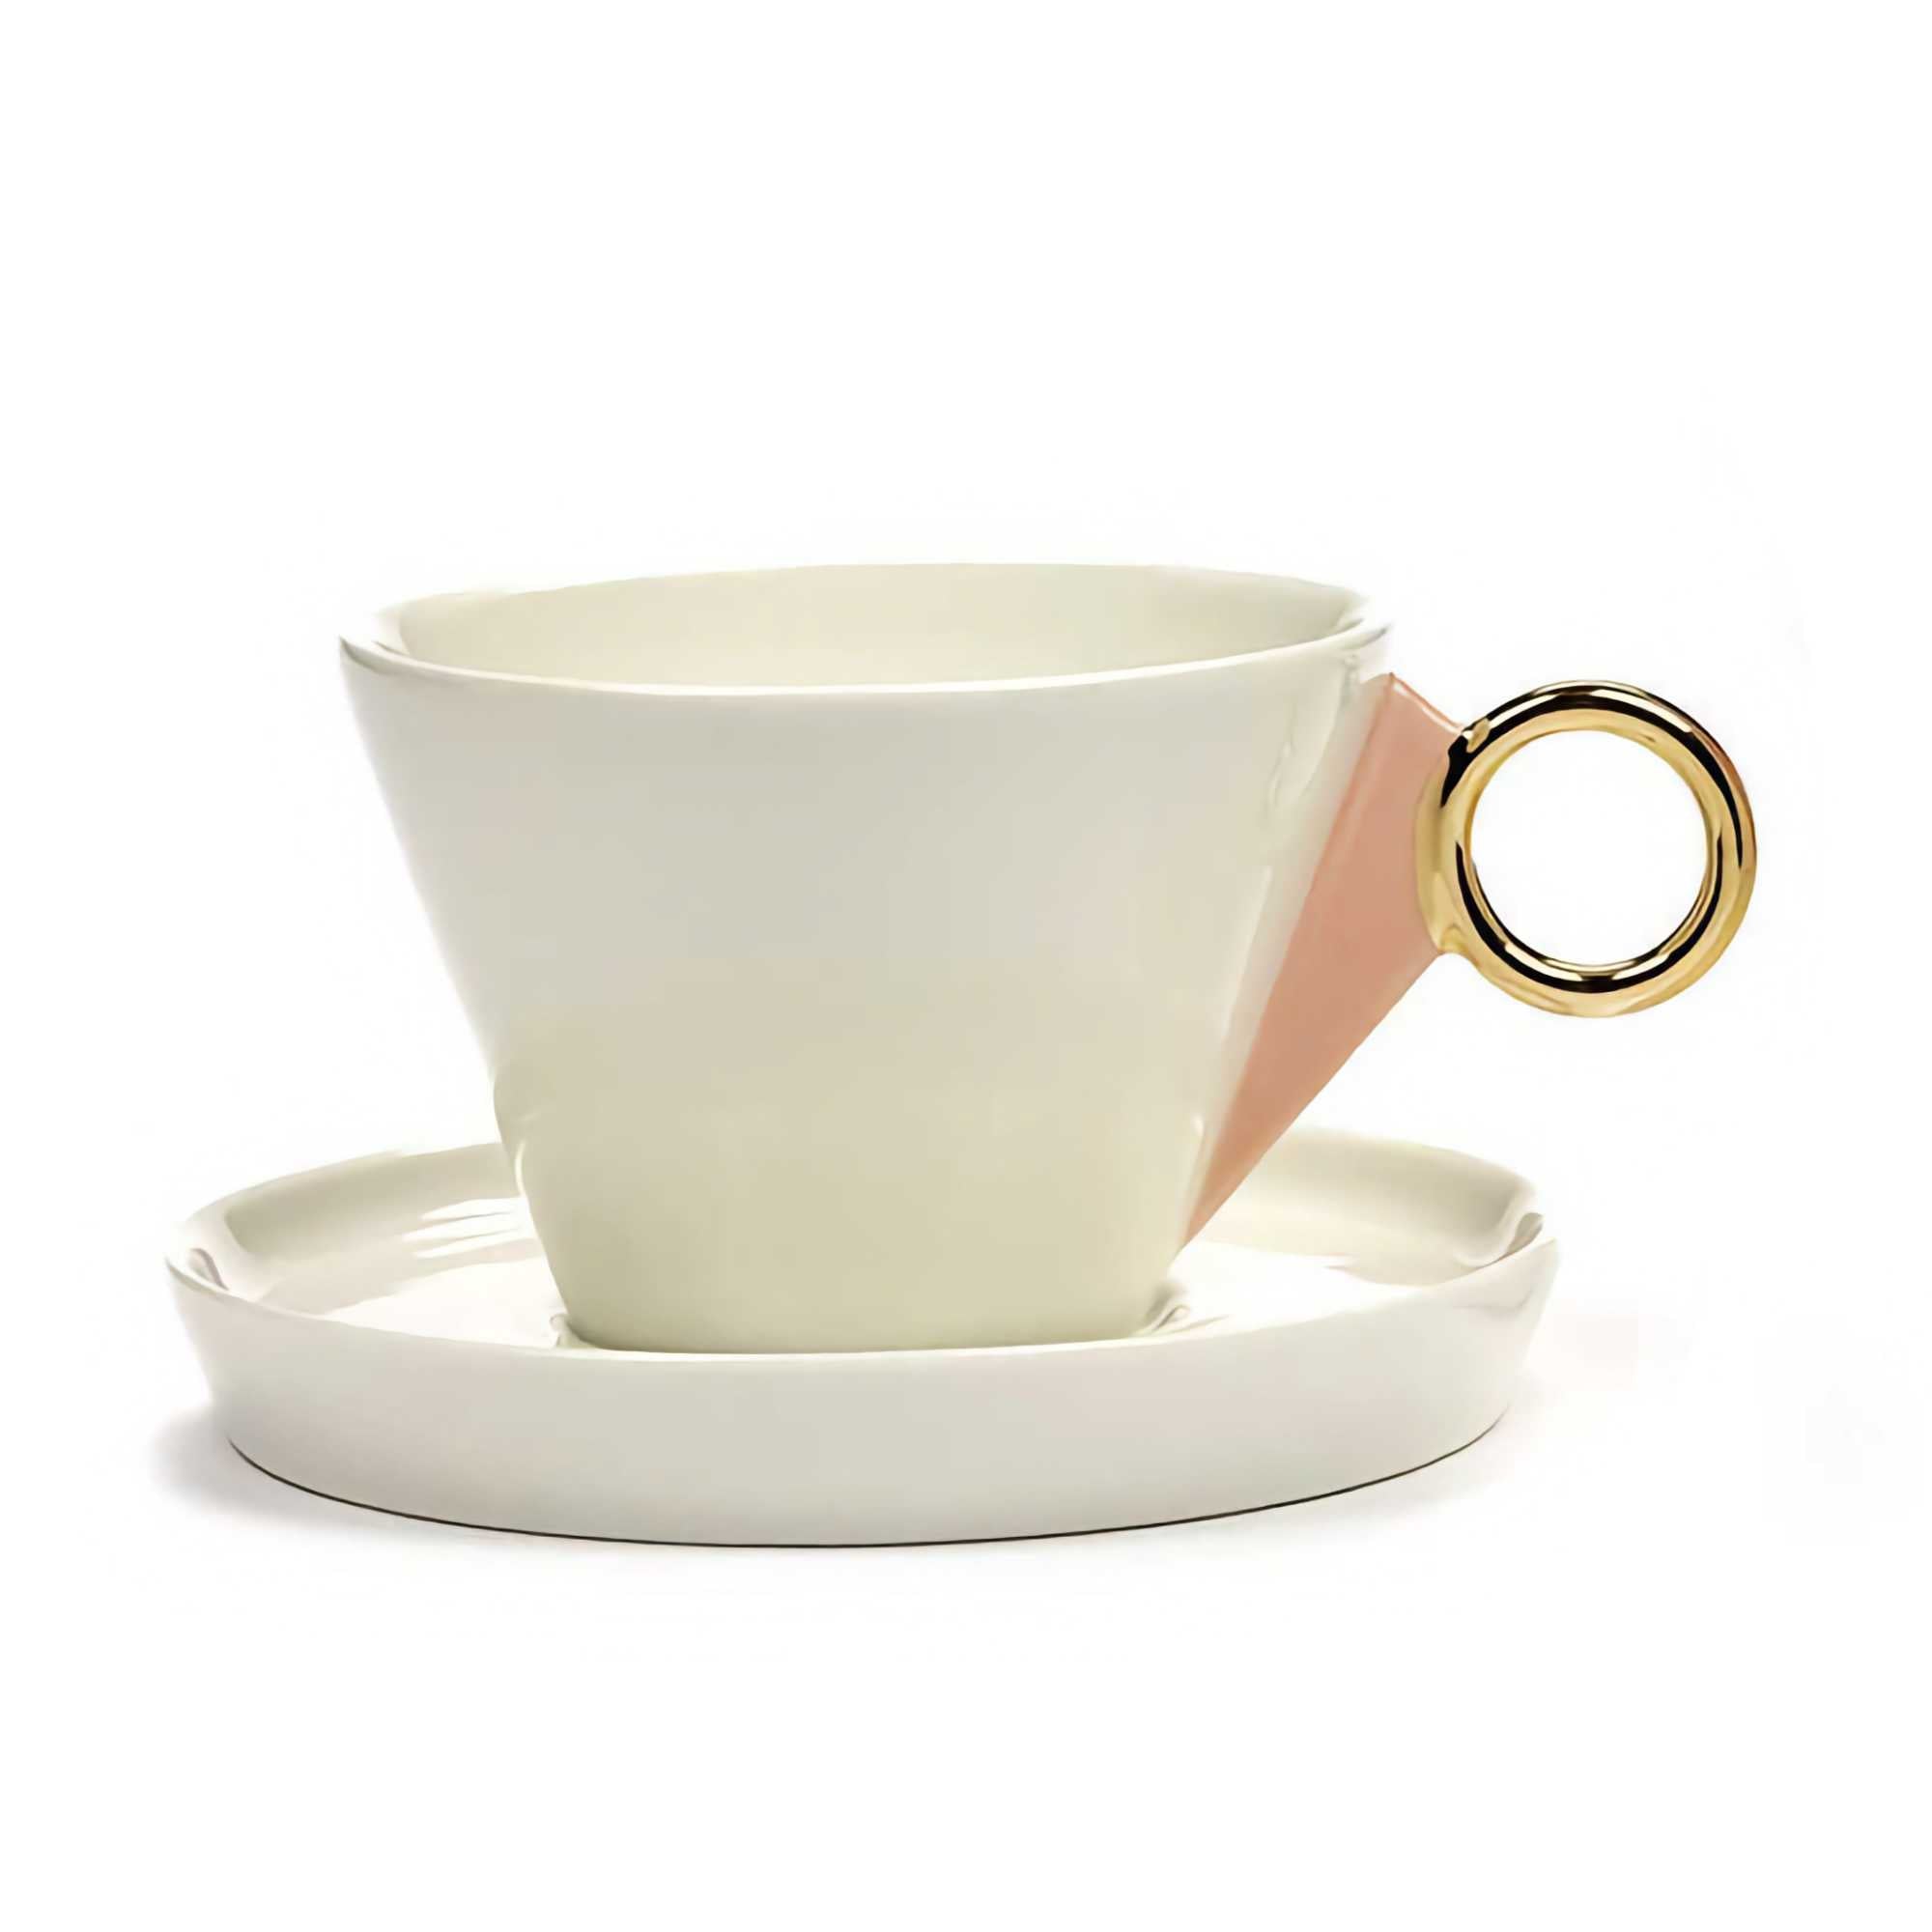 Serax Desiree Tea Cup with Saucer, White/Gold/Pink